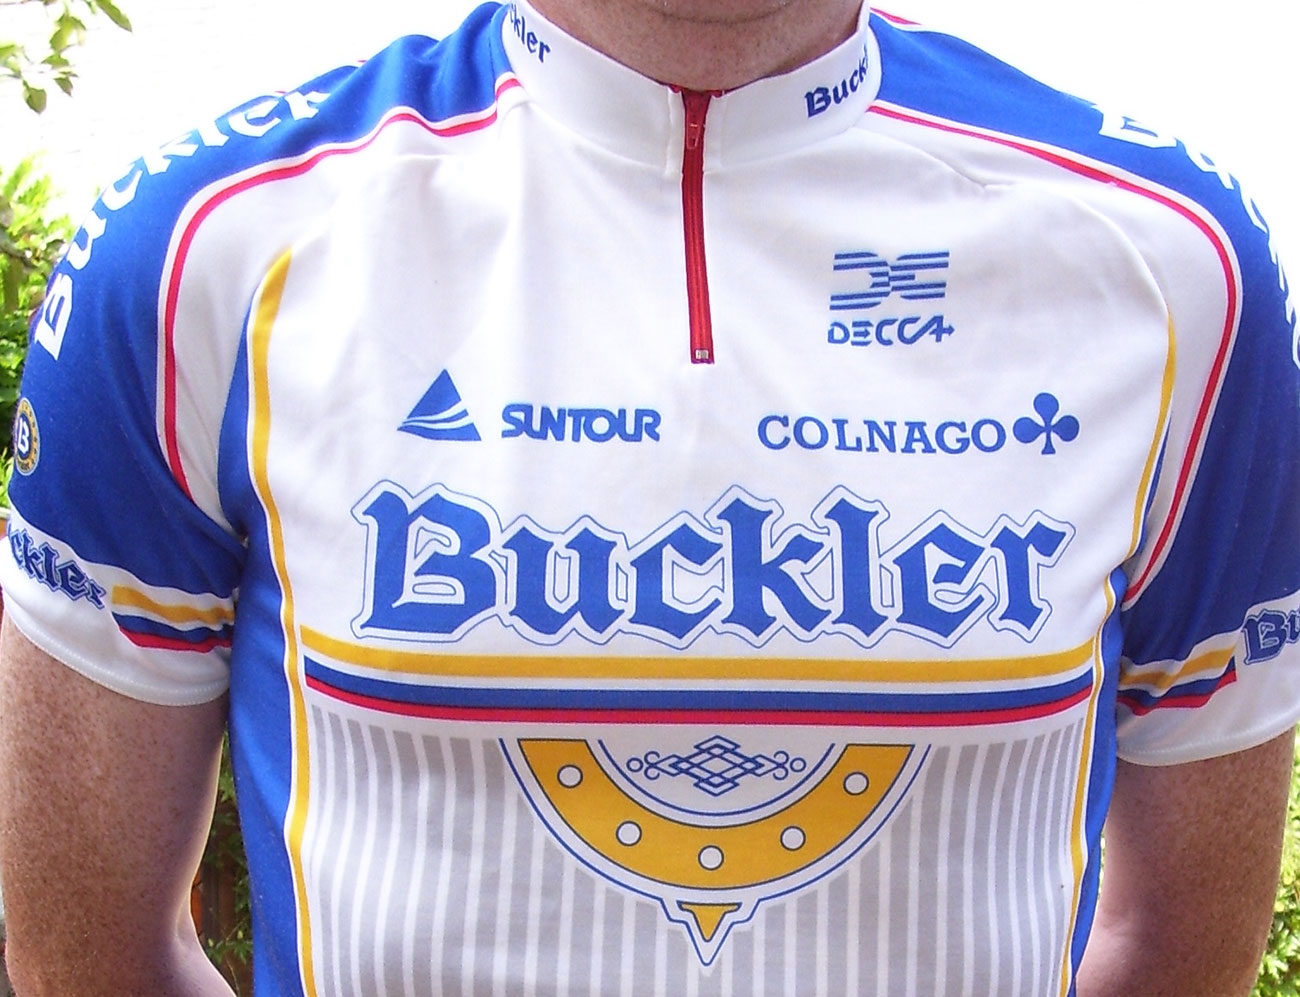 A cyclist wearing a shirt adorned with logos. Some are small and some are larger.